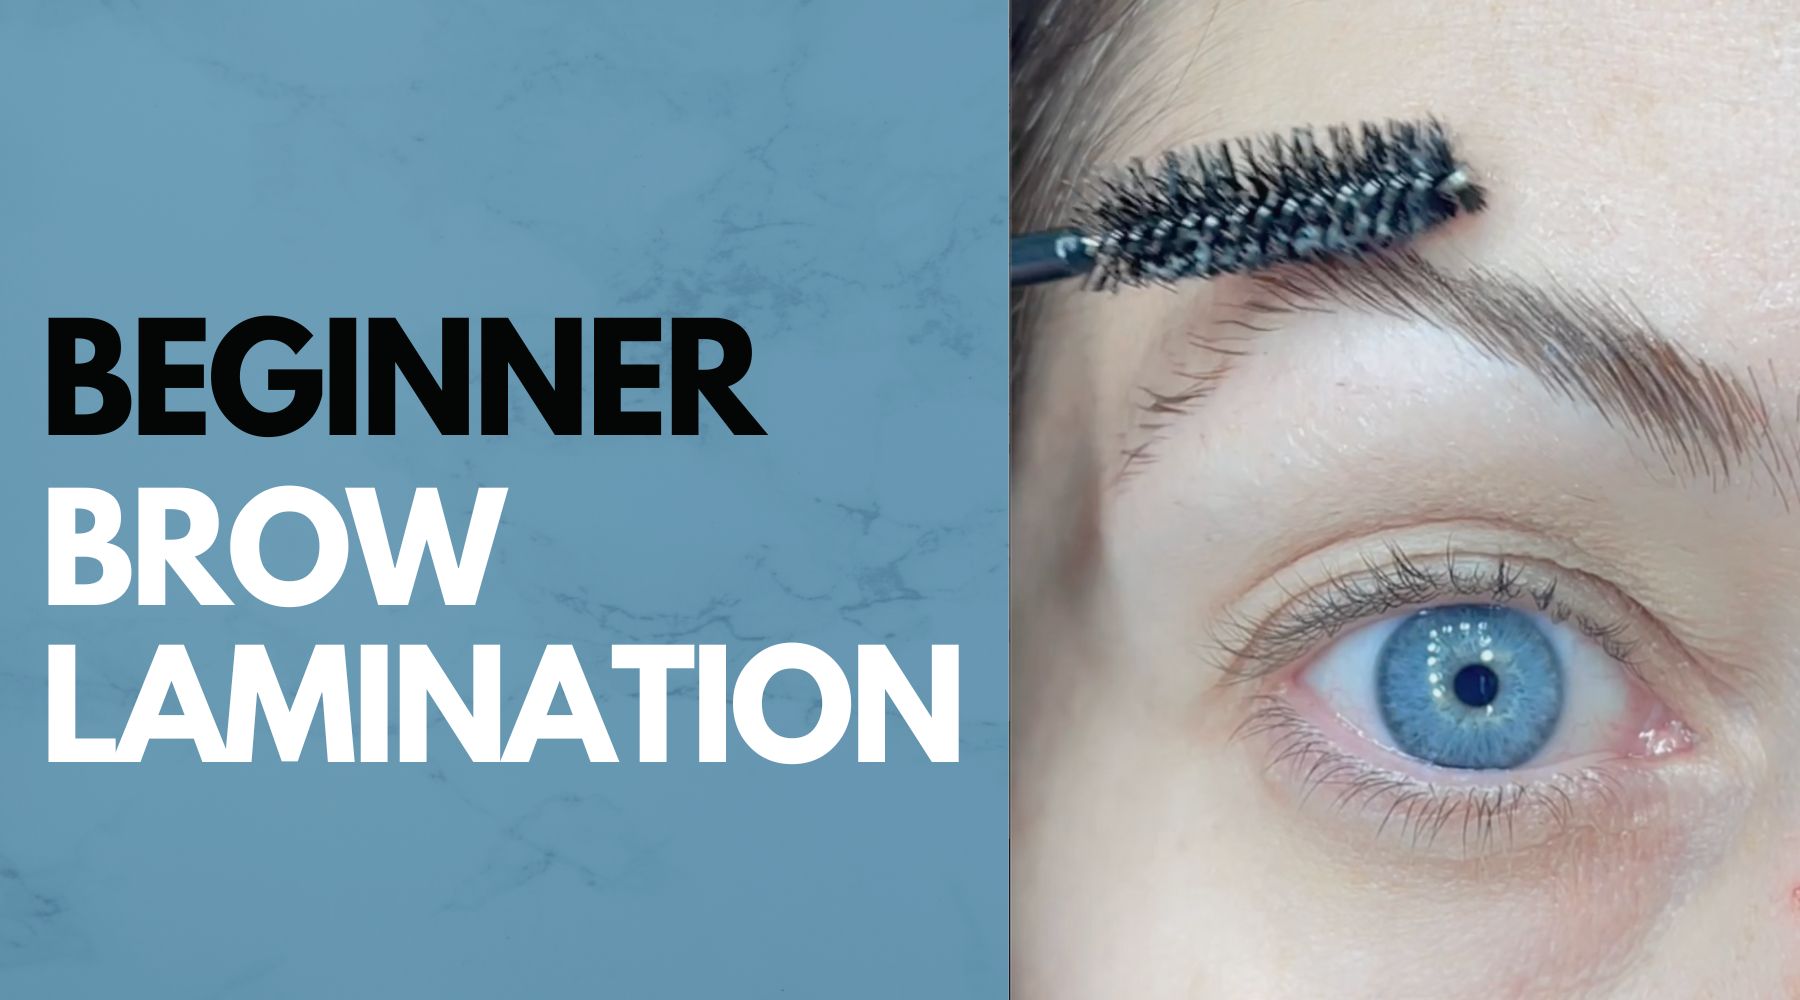 Beginner Brow Lamination Step by Step Instructions Blog Post